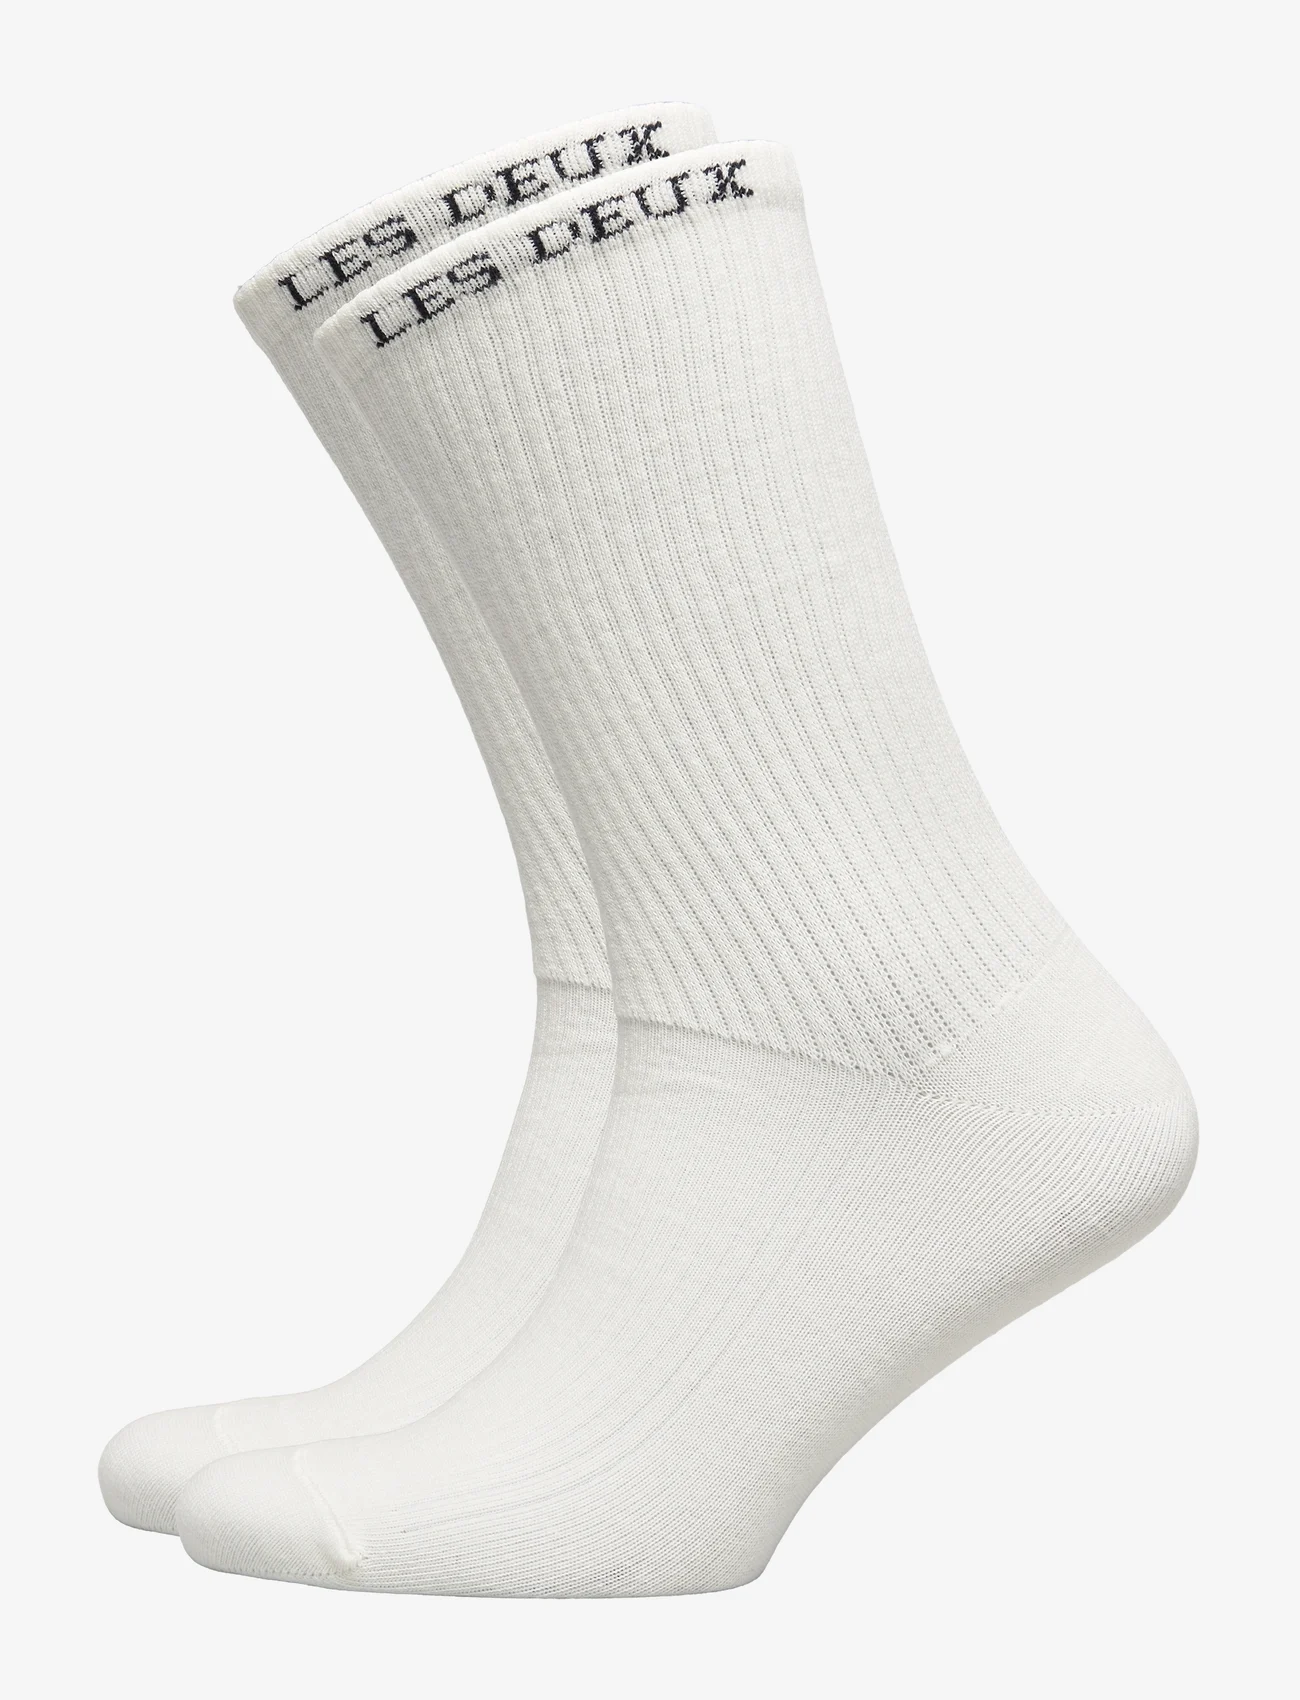 Les Deux - Wilfred Socks - 2-Pack - lowest prices - off white/black - 0